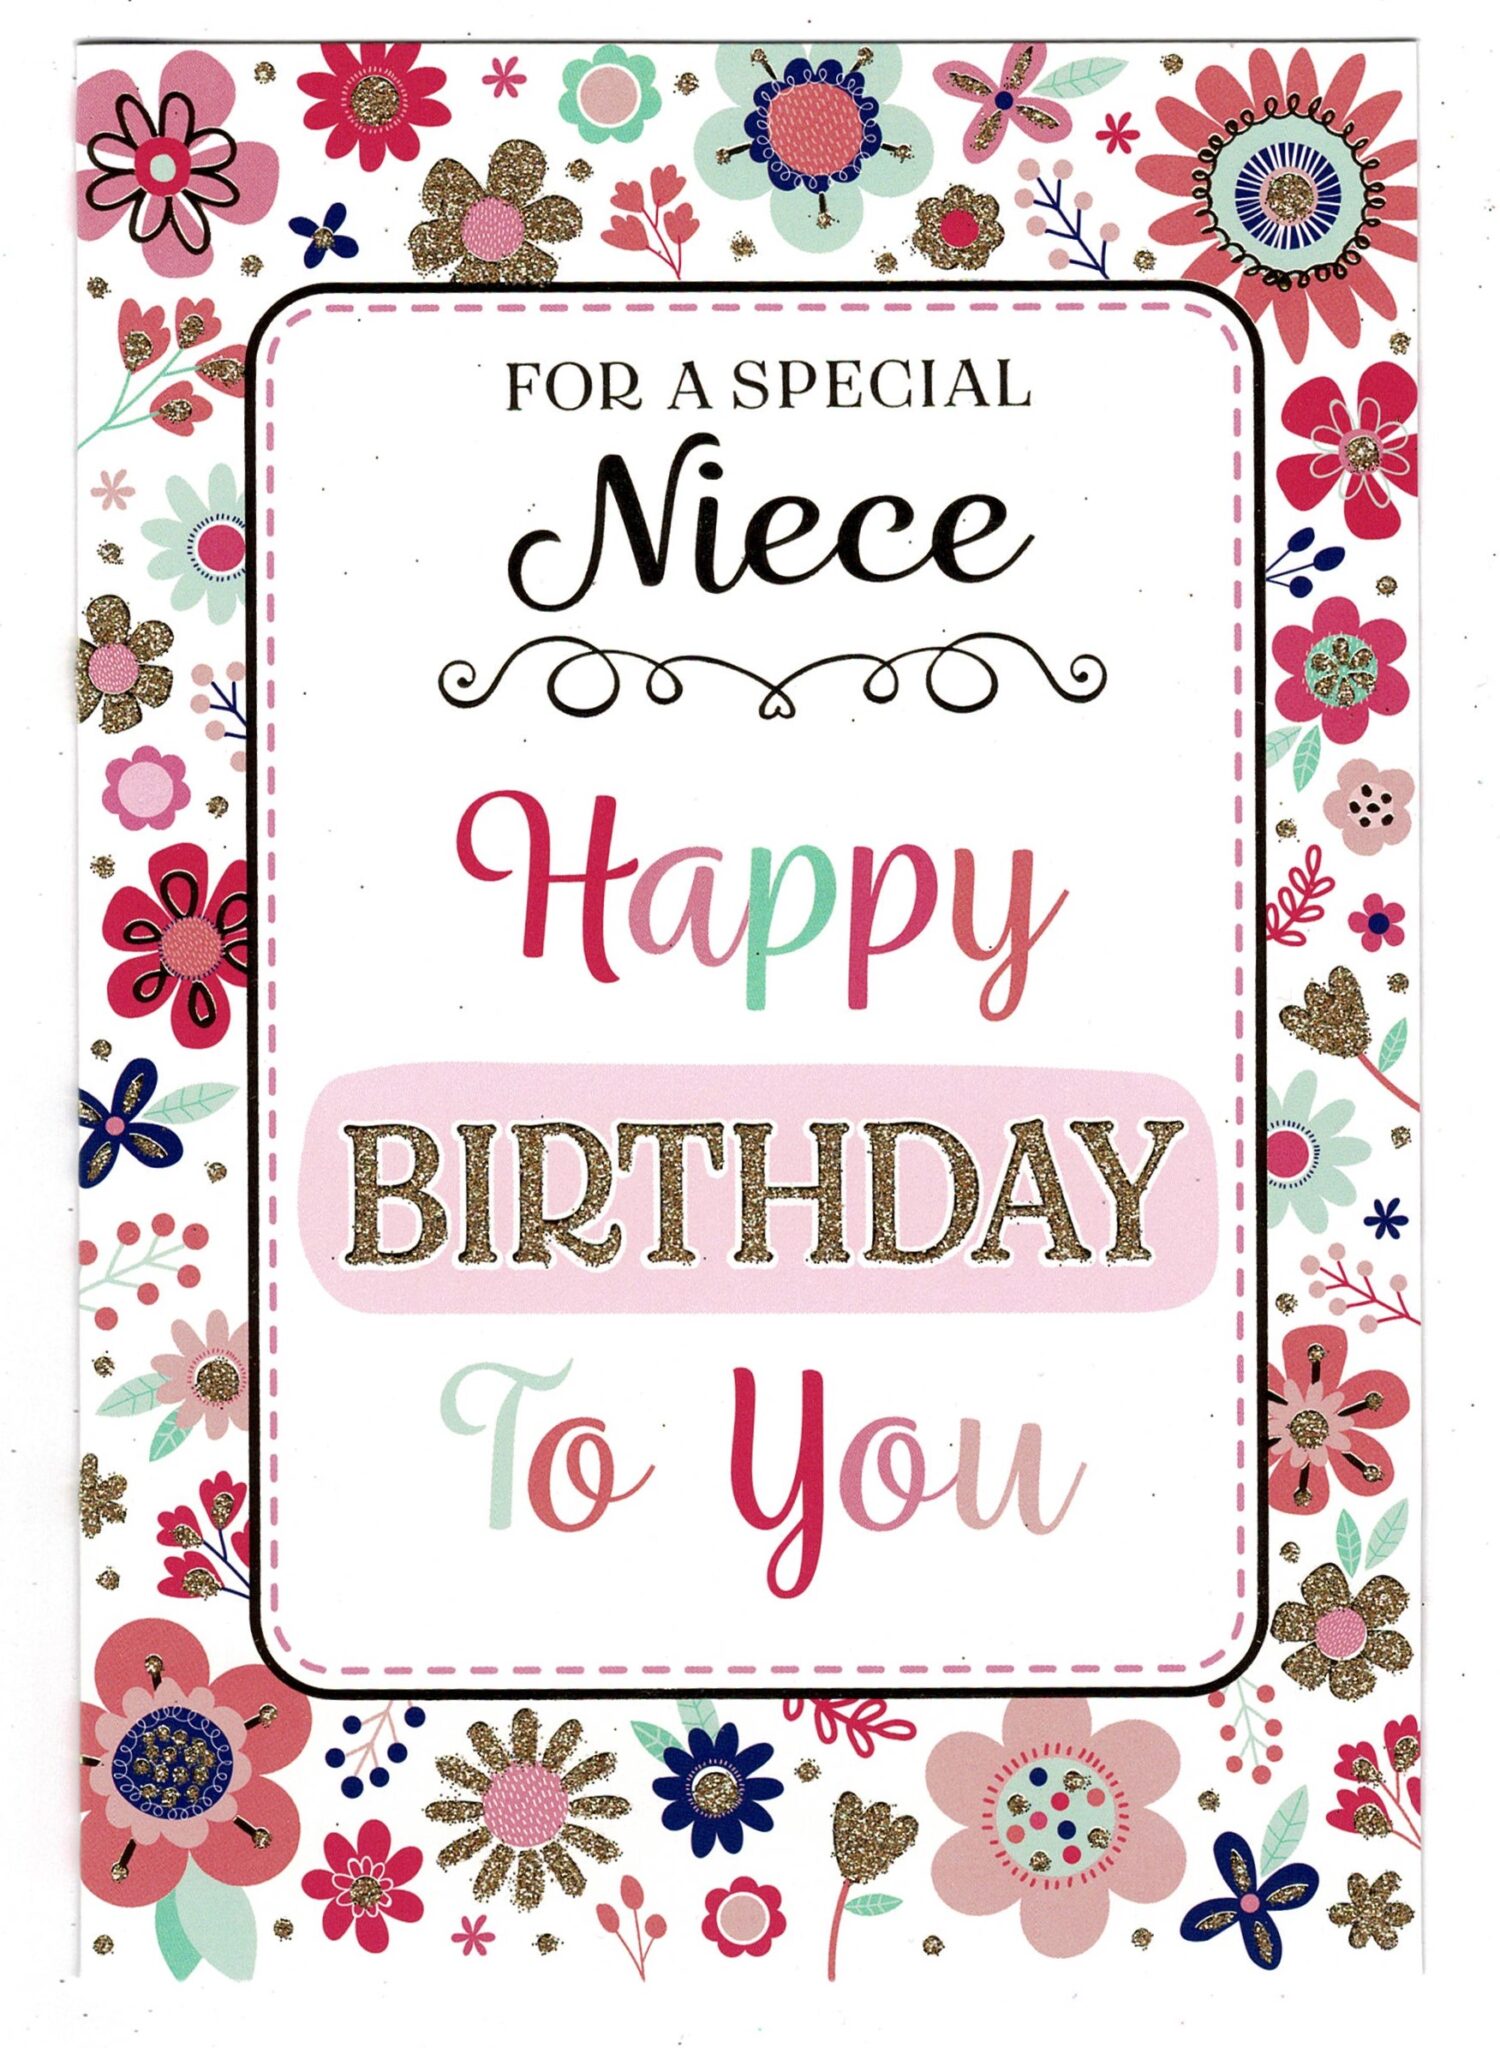 niece-birthday-card-for-a-special-niece-happy-birthday-to-you-with